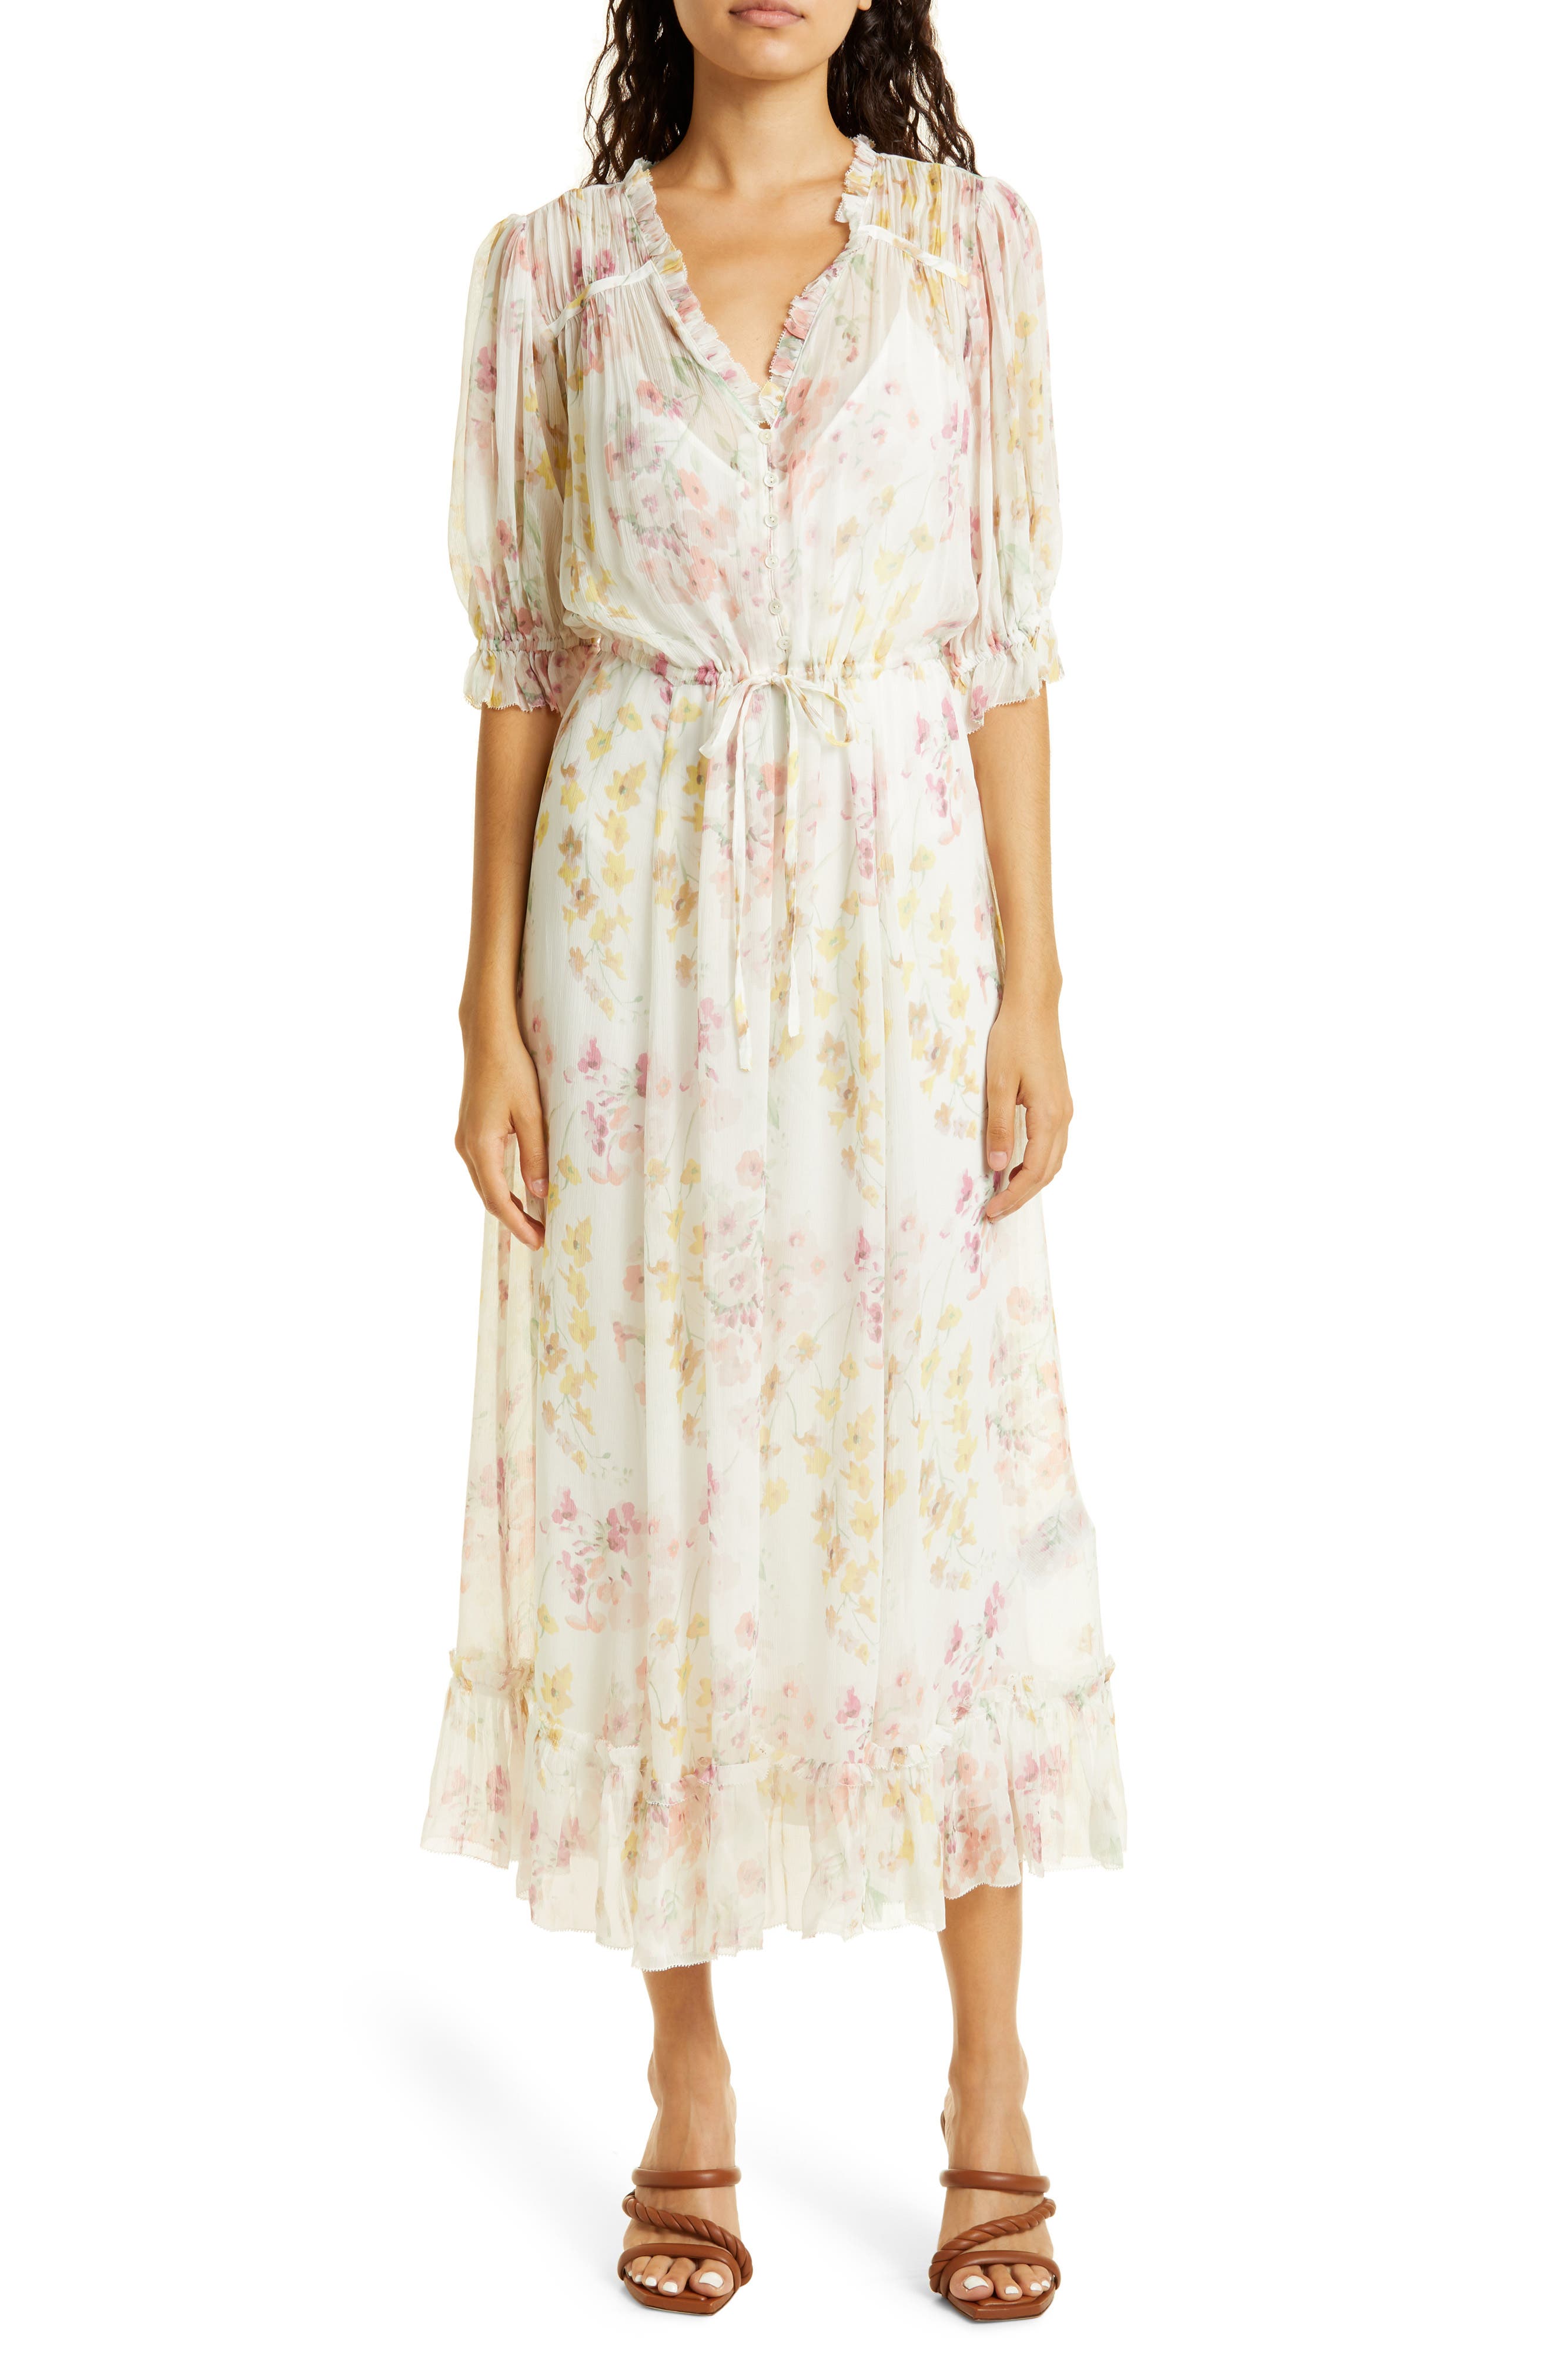 Lauren by Ralph Lauren Synthetic Midi Dress in Pink Womens Clothing Dresses Casual and summer maxi dresses 